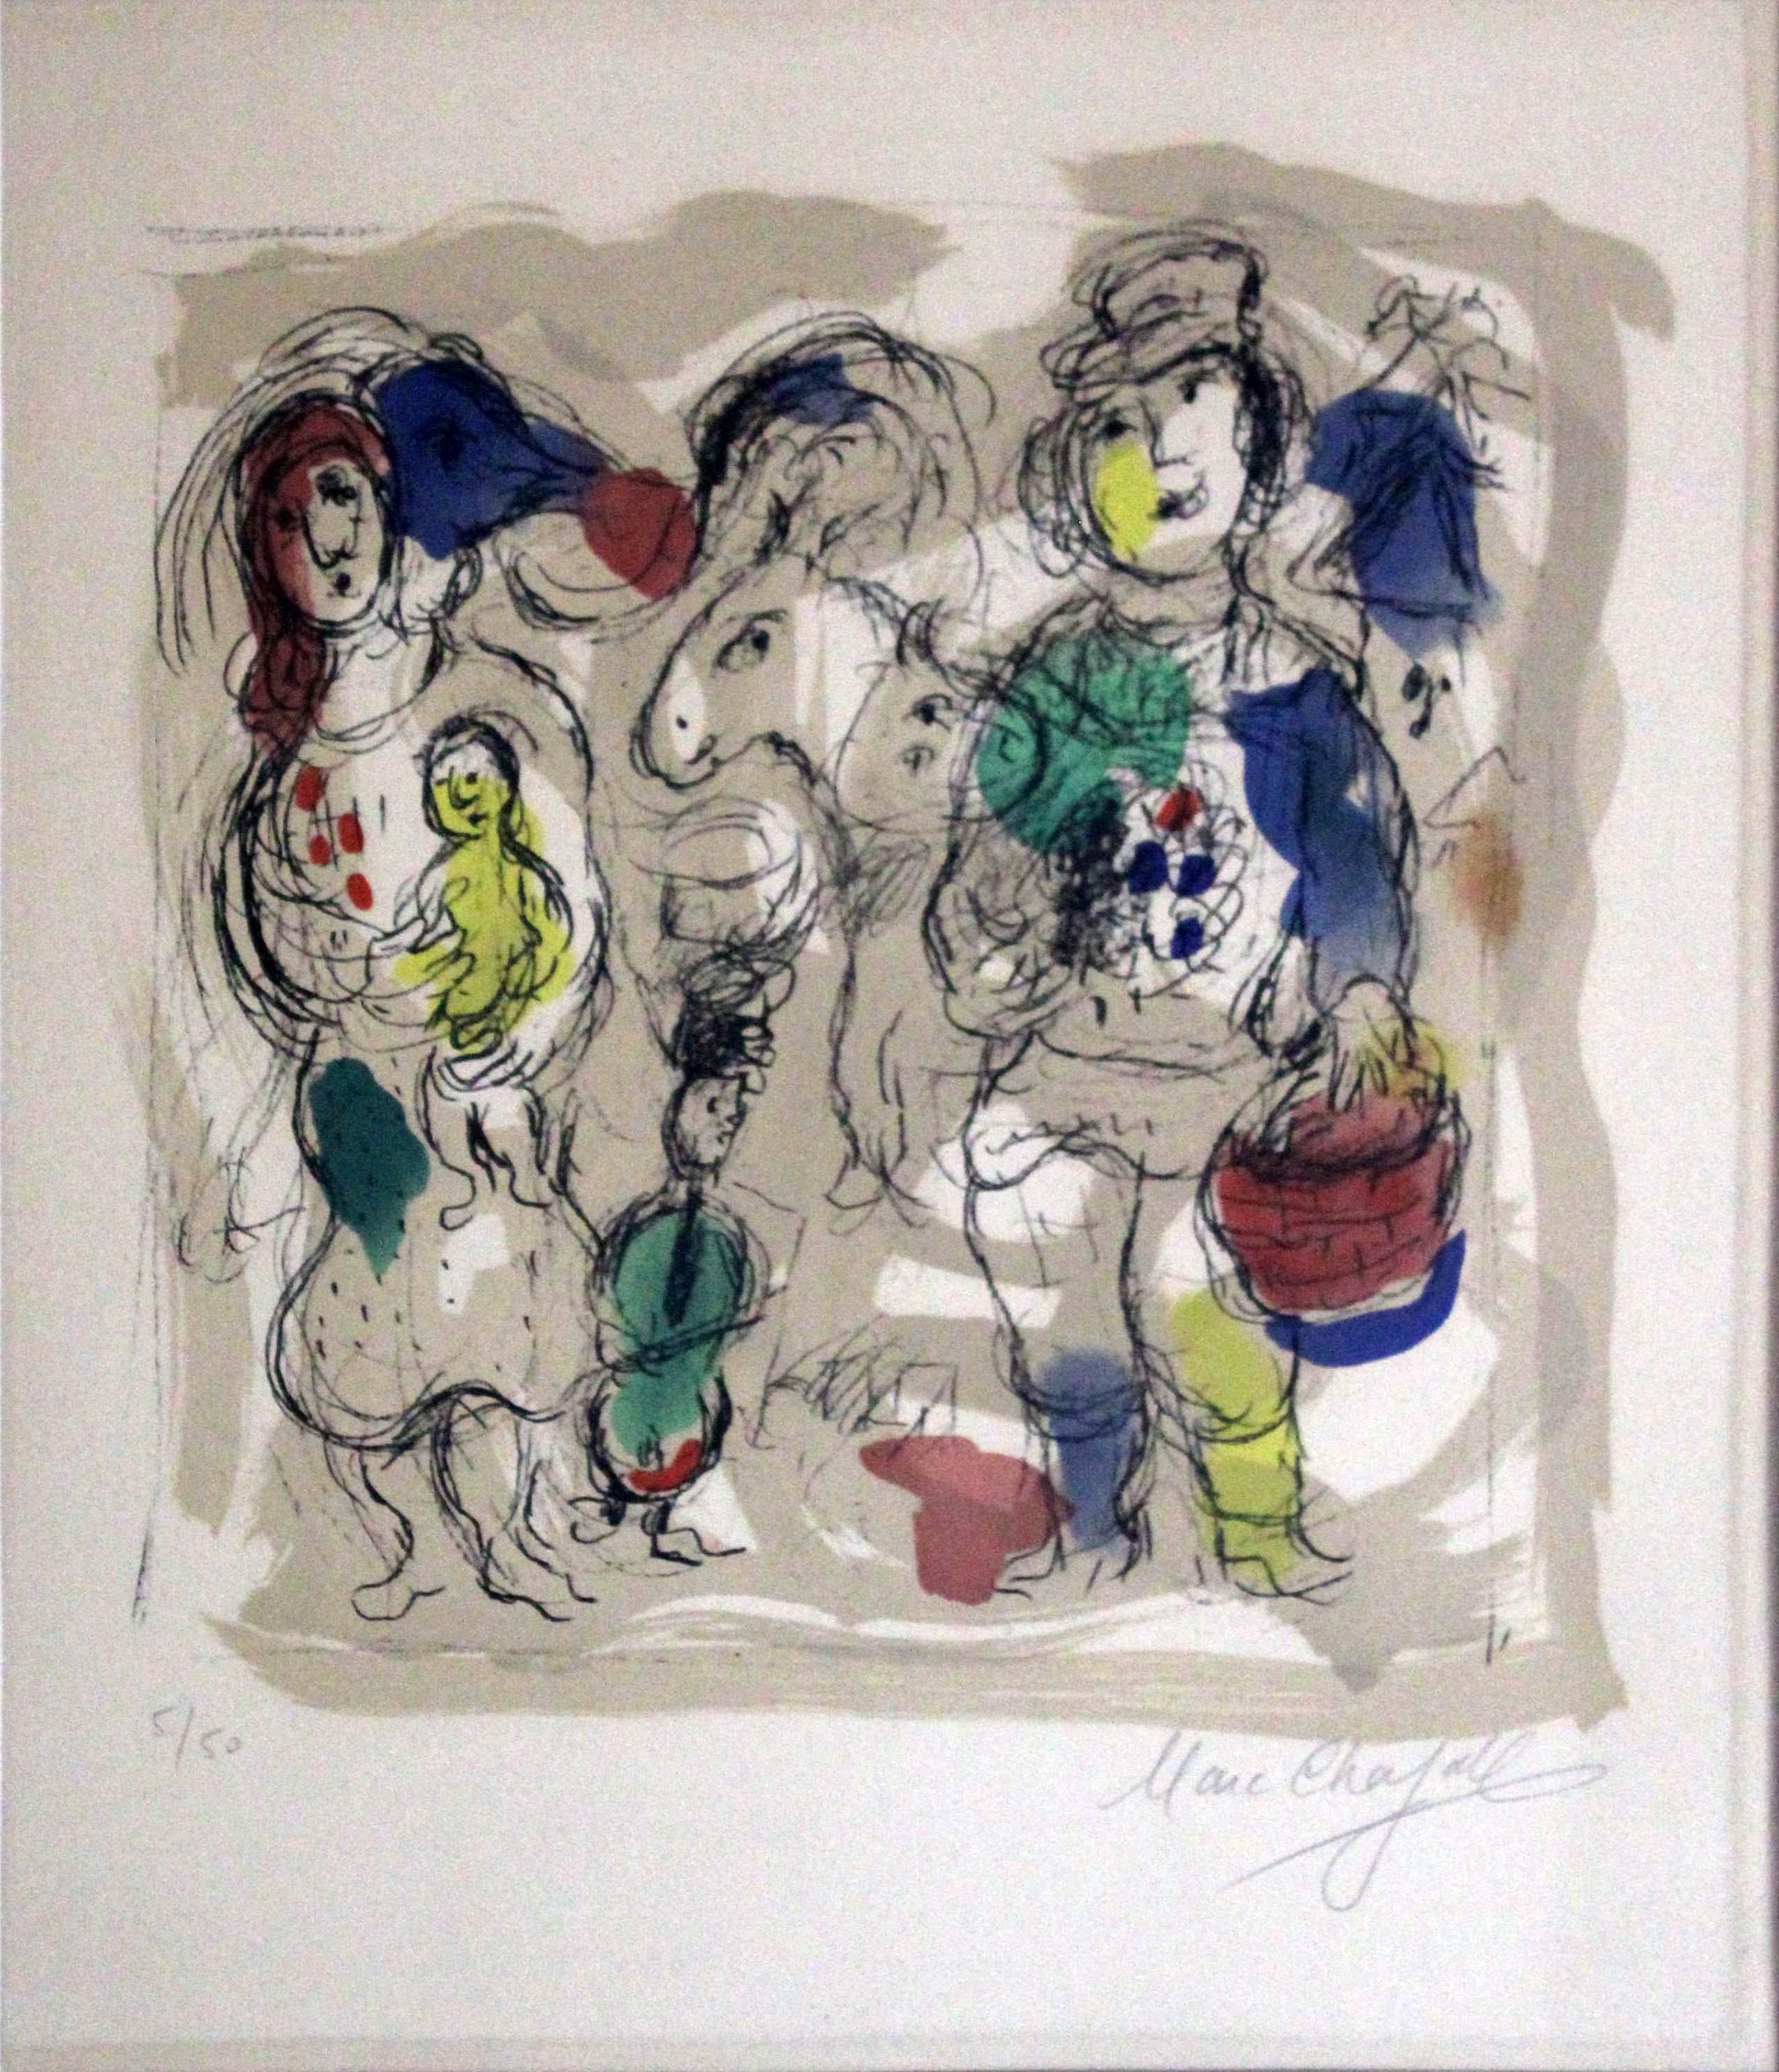 A lovely limited edition color lithograph on Arches paper titled Petits Paysans I (Little Peasants) by Marc Chagall. Signed on the bottom right with an annotation of 5/50 on the bottom left. Published by Maeght, Paris. A romantic image of floating